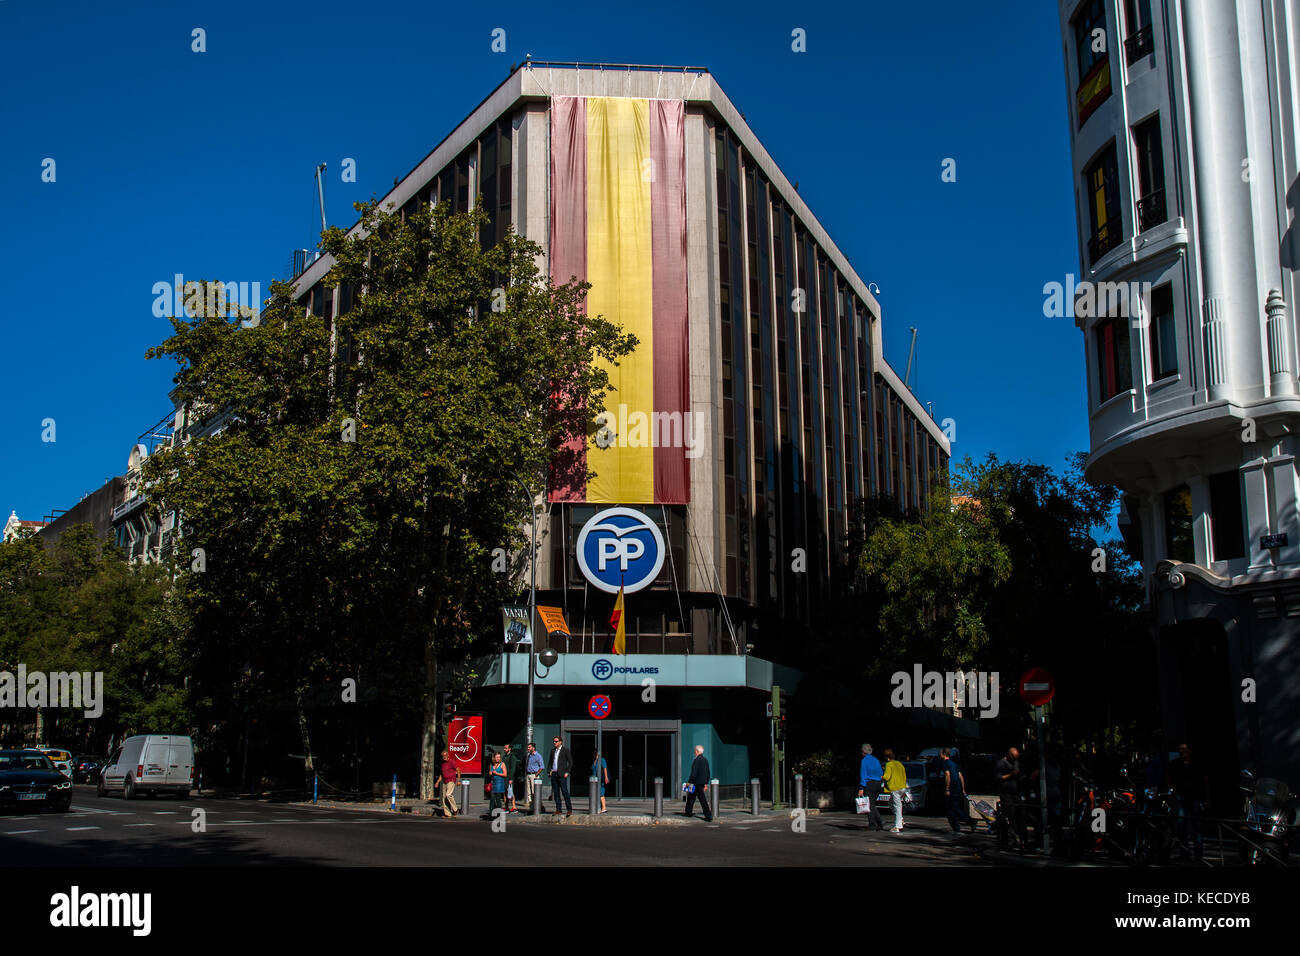 Madrid, Spain. 16 Oct, 2017. Headquarters of Government party 'Partido Popular (PP)' shows a large Spanish flag, in Madrid, Spain. Stock Photo